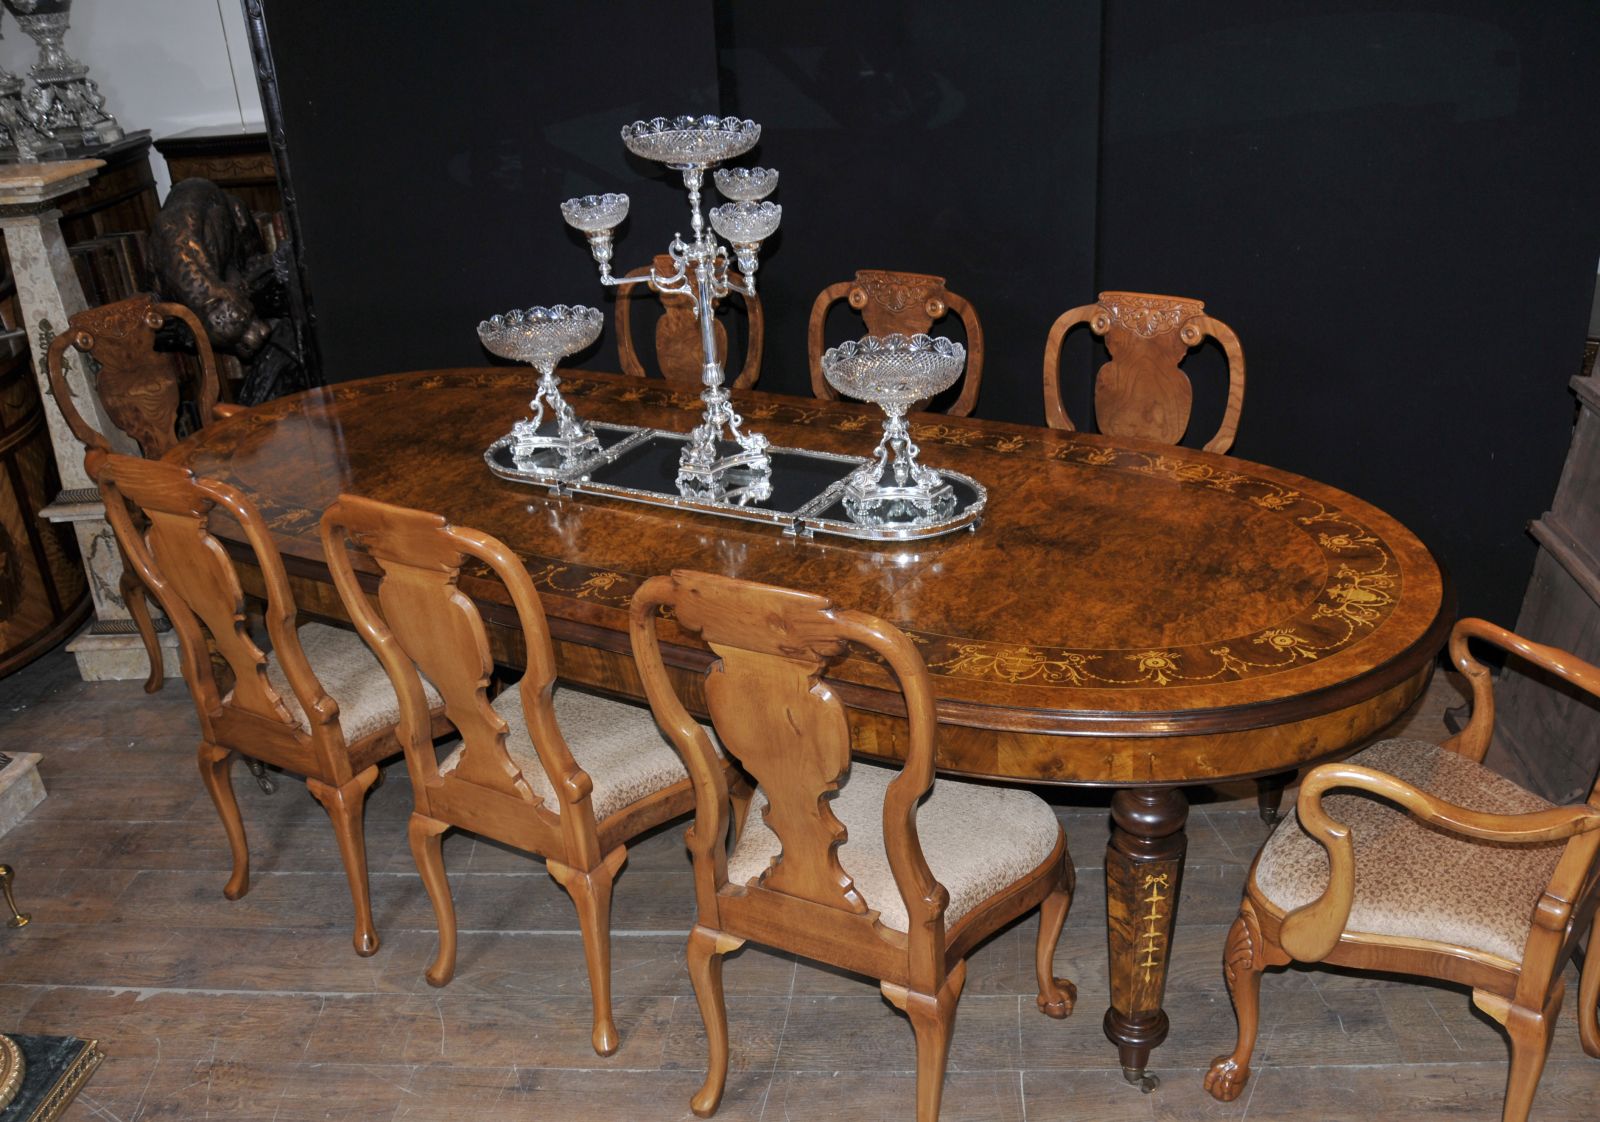 Victorian silver plate centrepiece on a walnut table